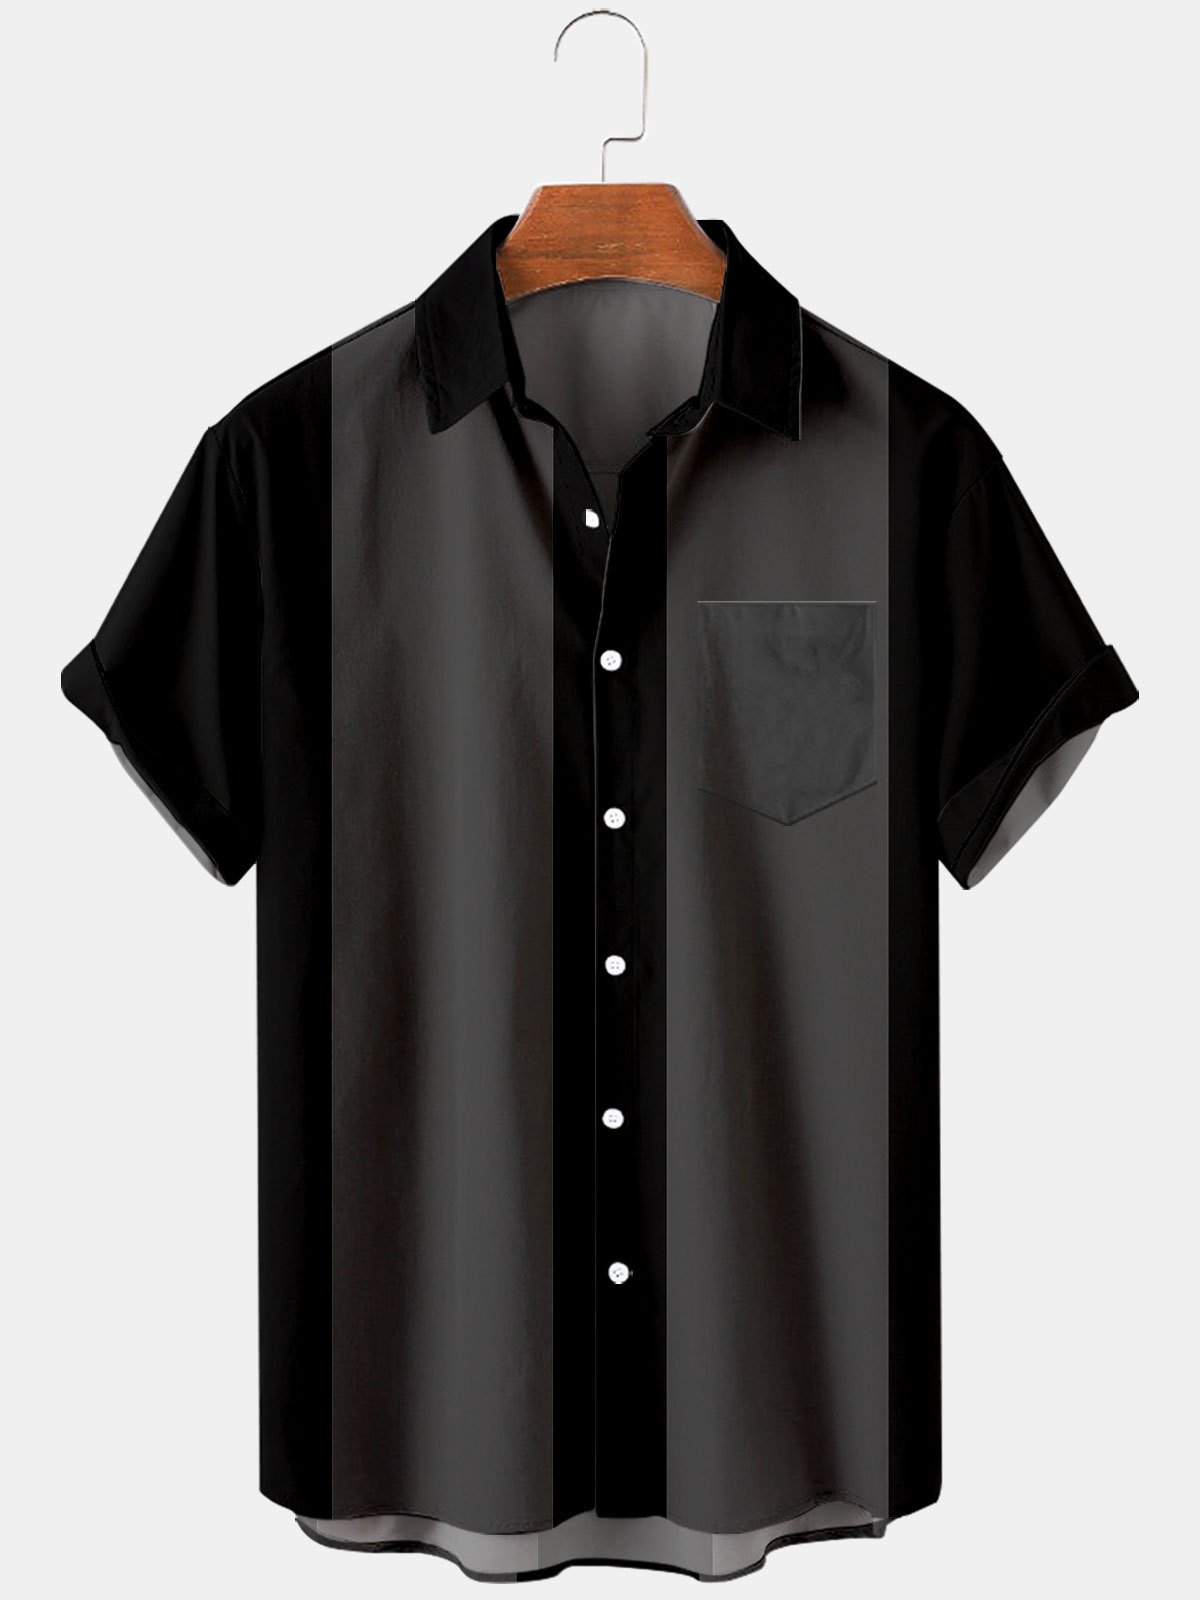 Hardaddy Shirts For Father Men's Basic 50s Style Bowling Shirt